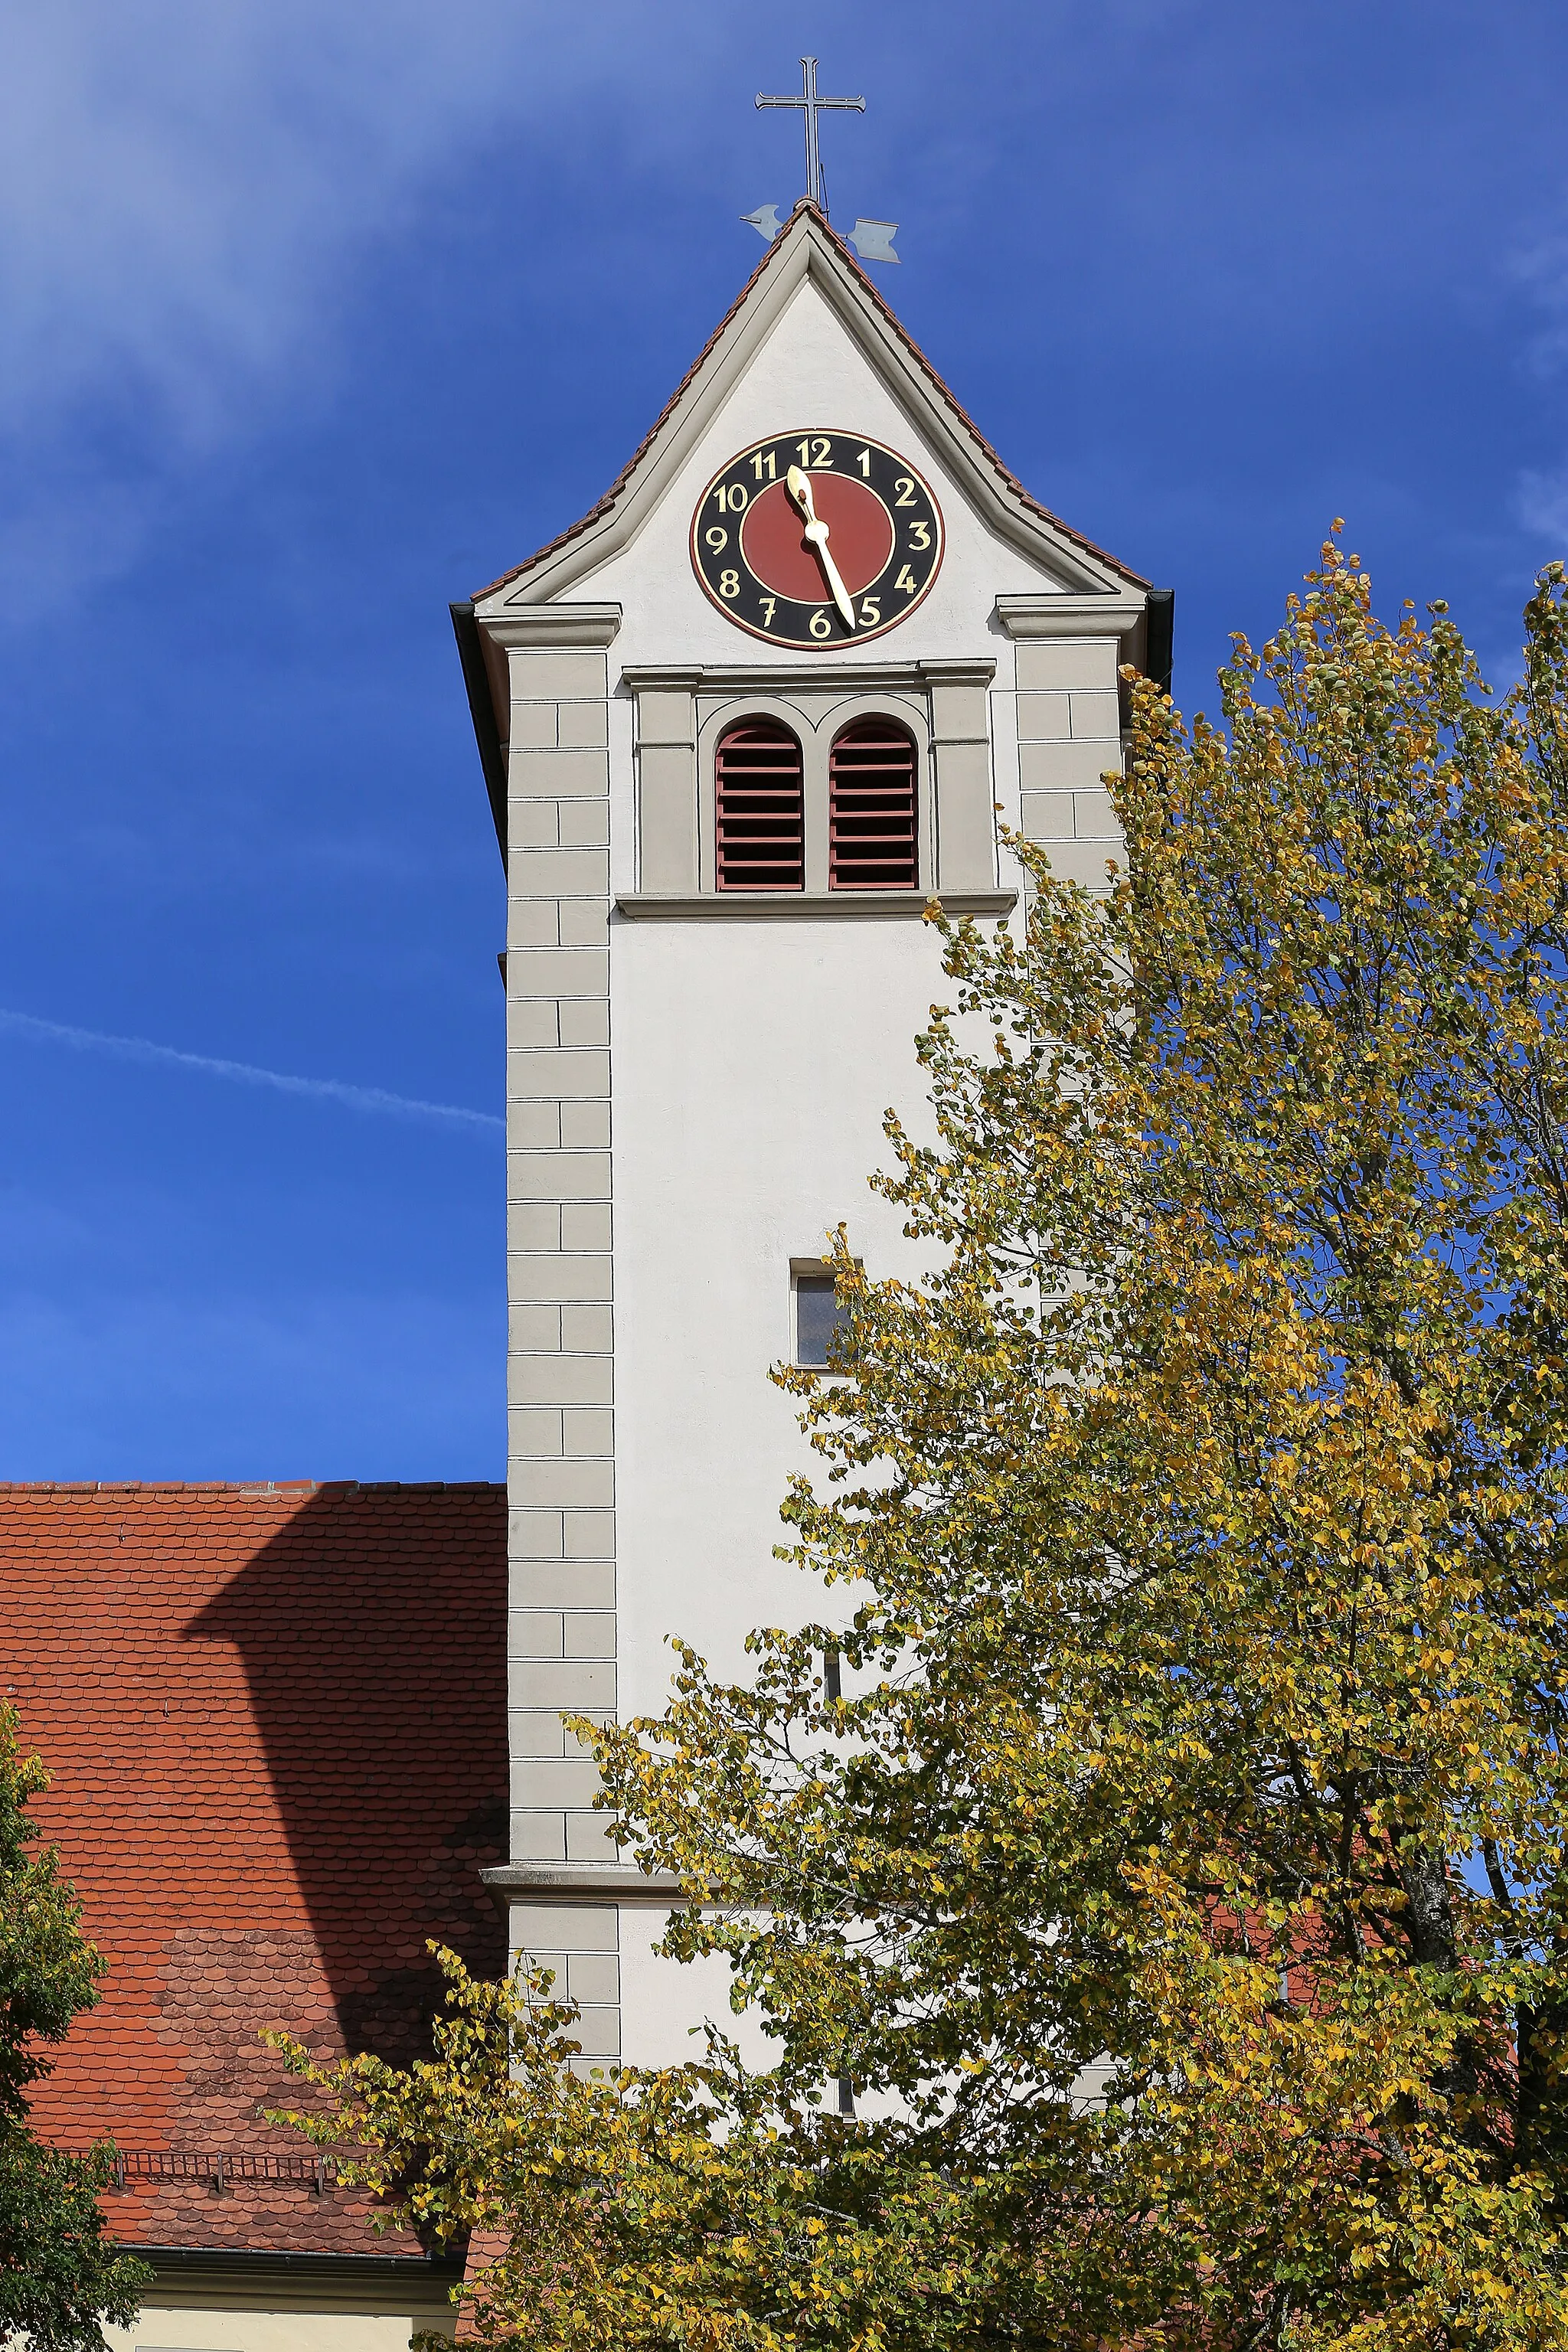 Photo showing: Tower of the parish church St. Pankratius in Steinhilben. The place is a district of Trochtelfingen and is located on the Swabian Alb (Baden-Württemberg).